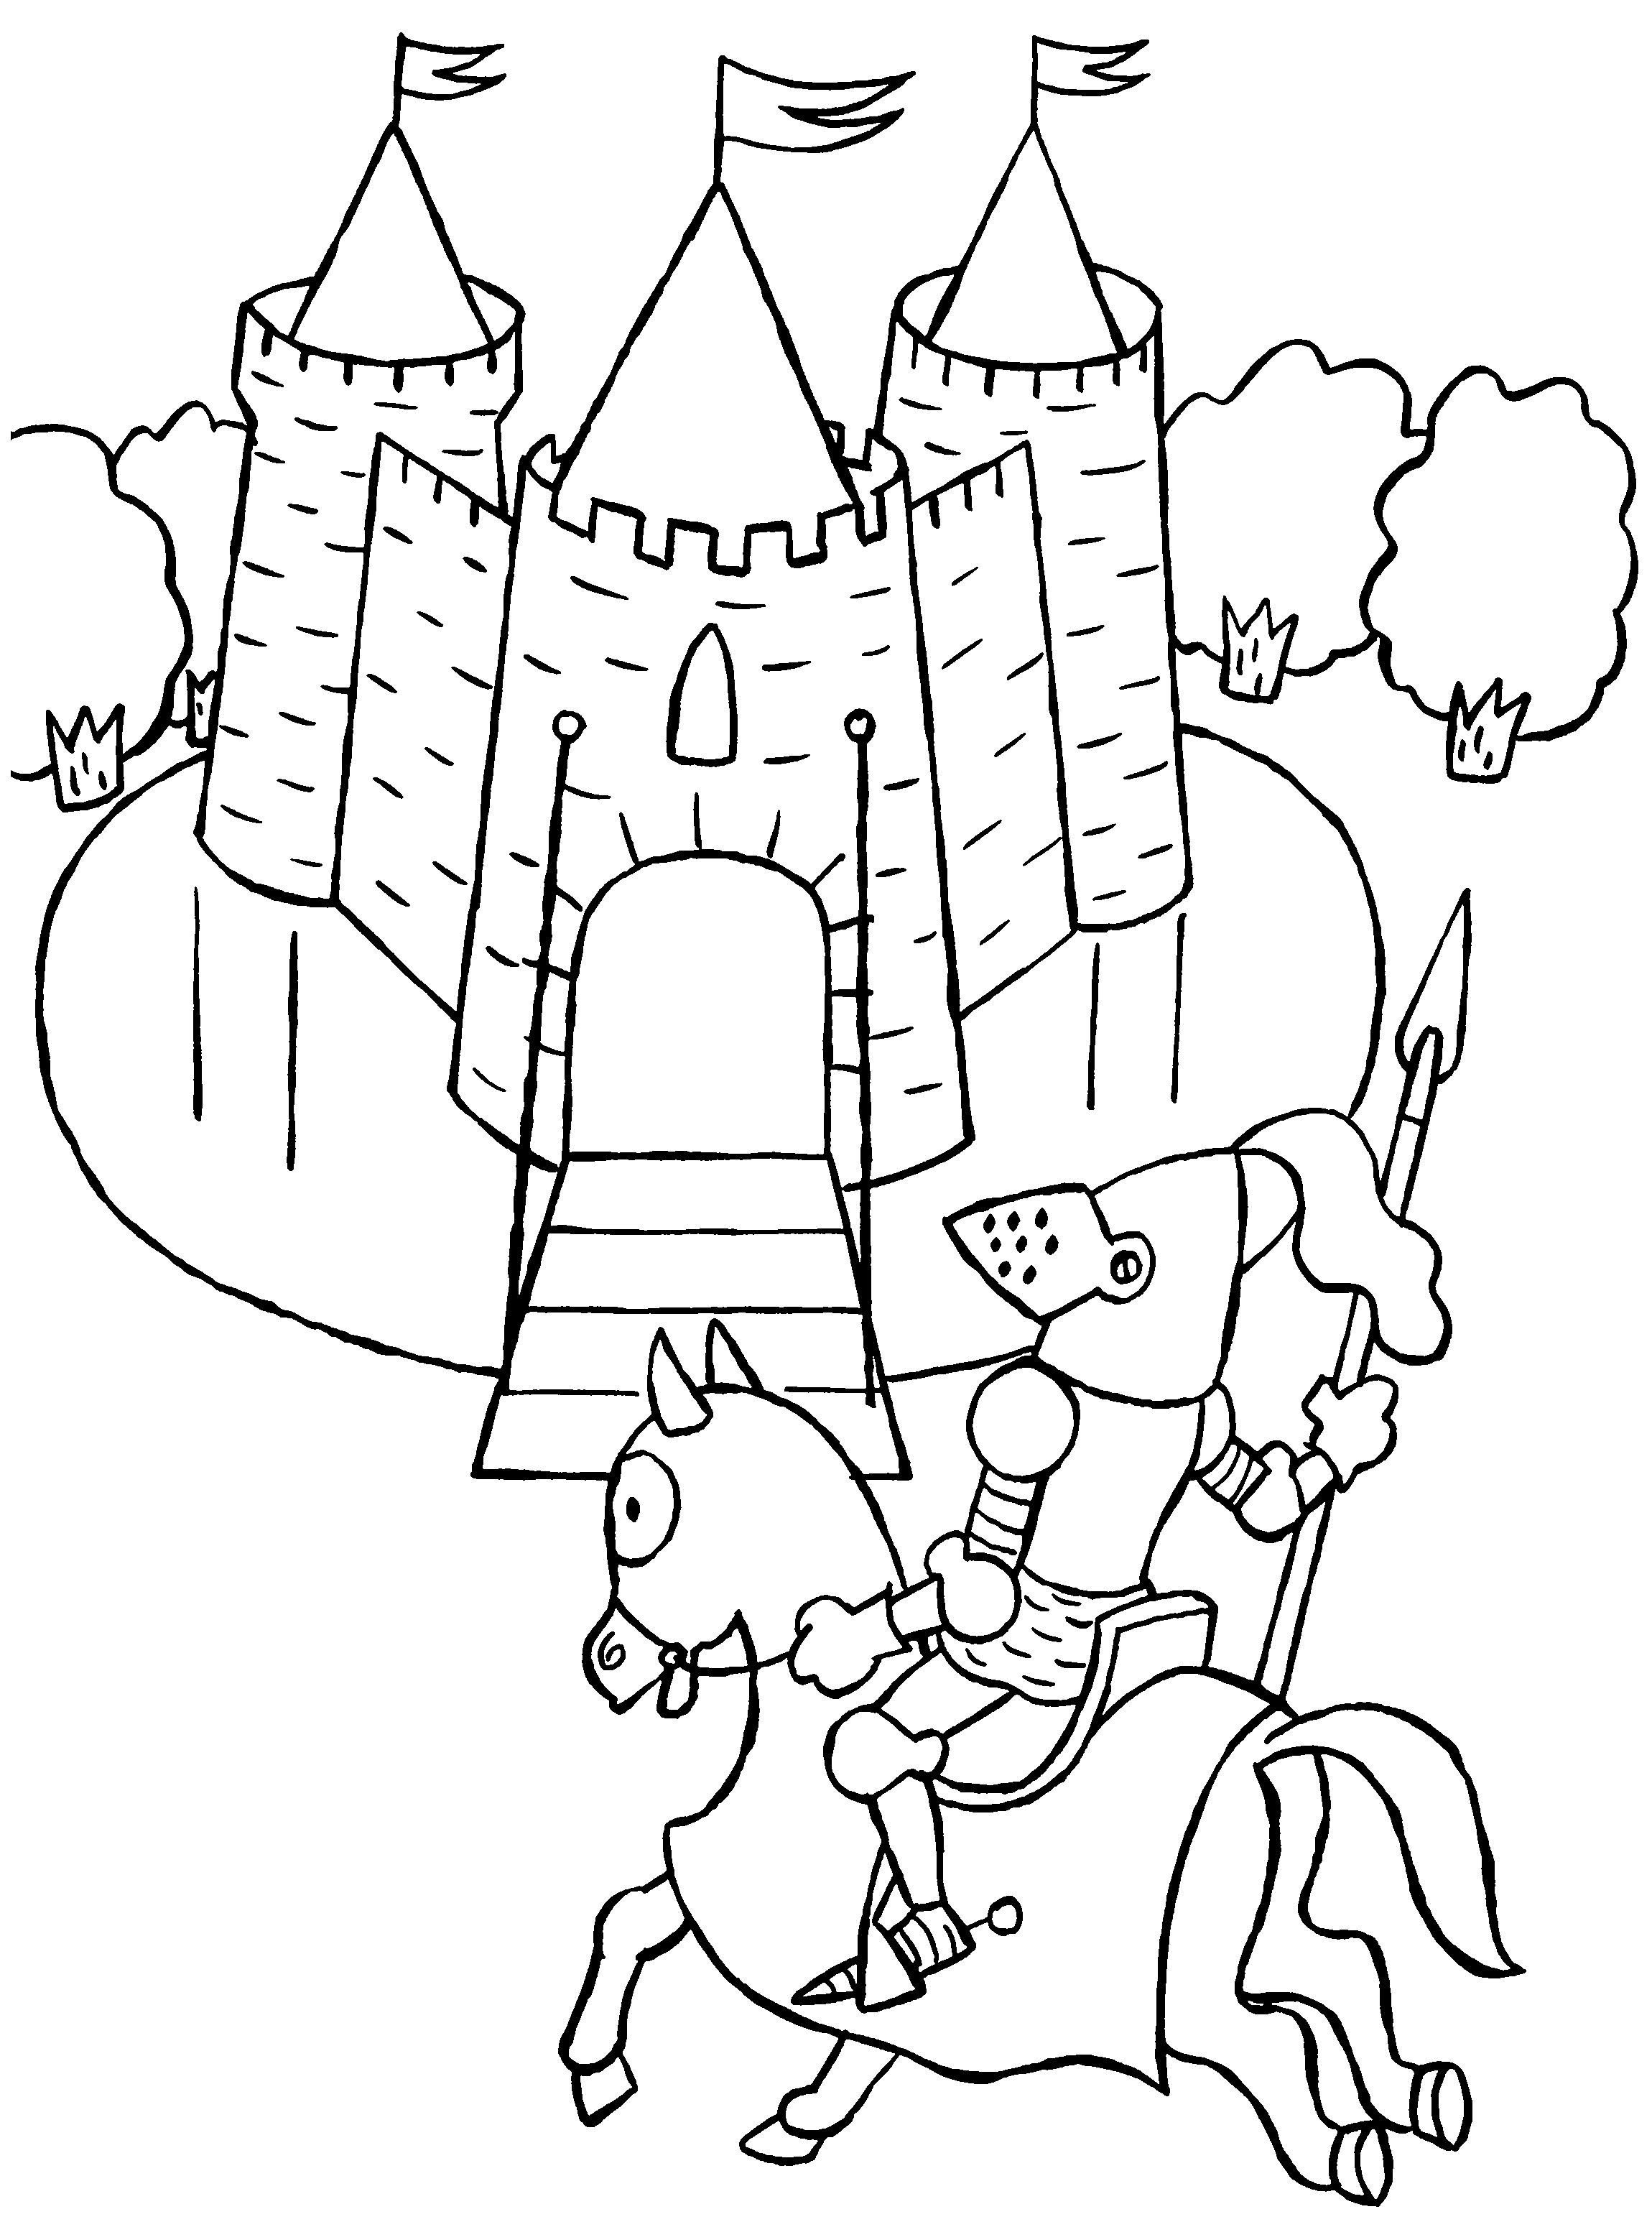 knight coloring page bluebonkers medieval knights in armor coloring sheets page coloring knight 